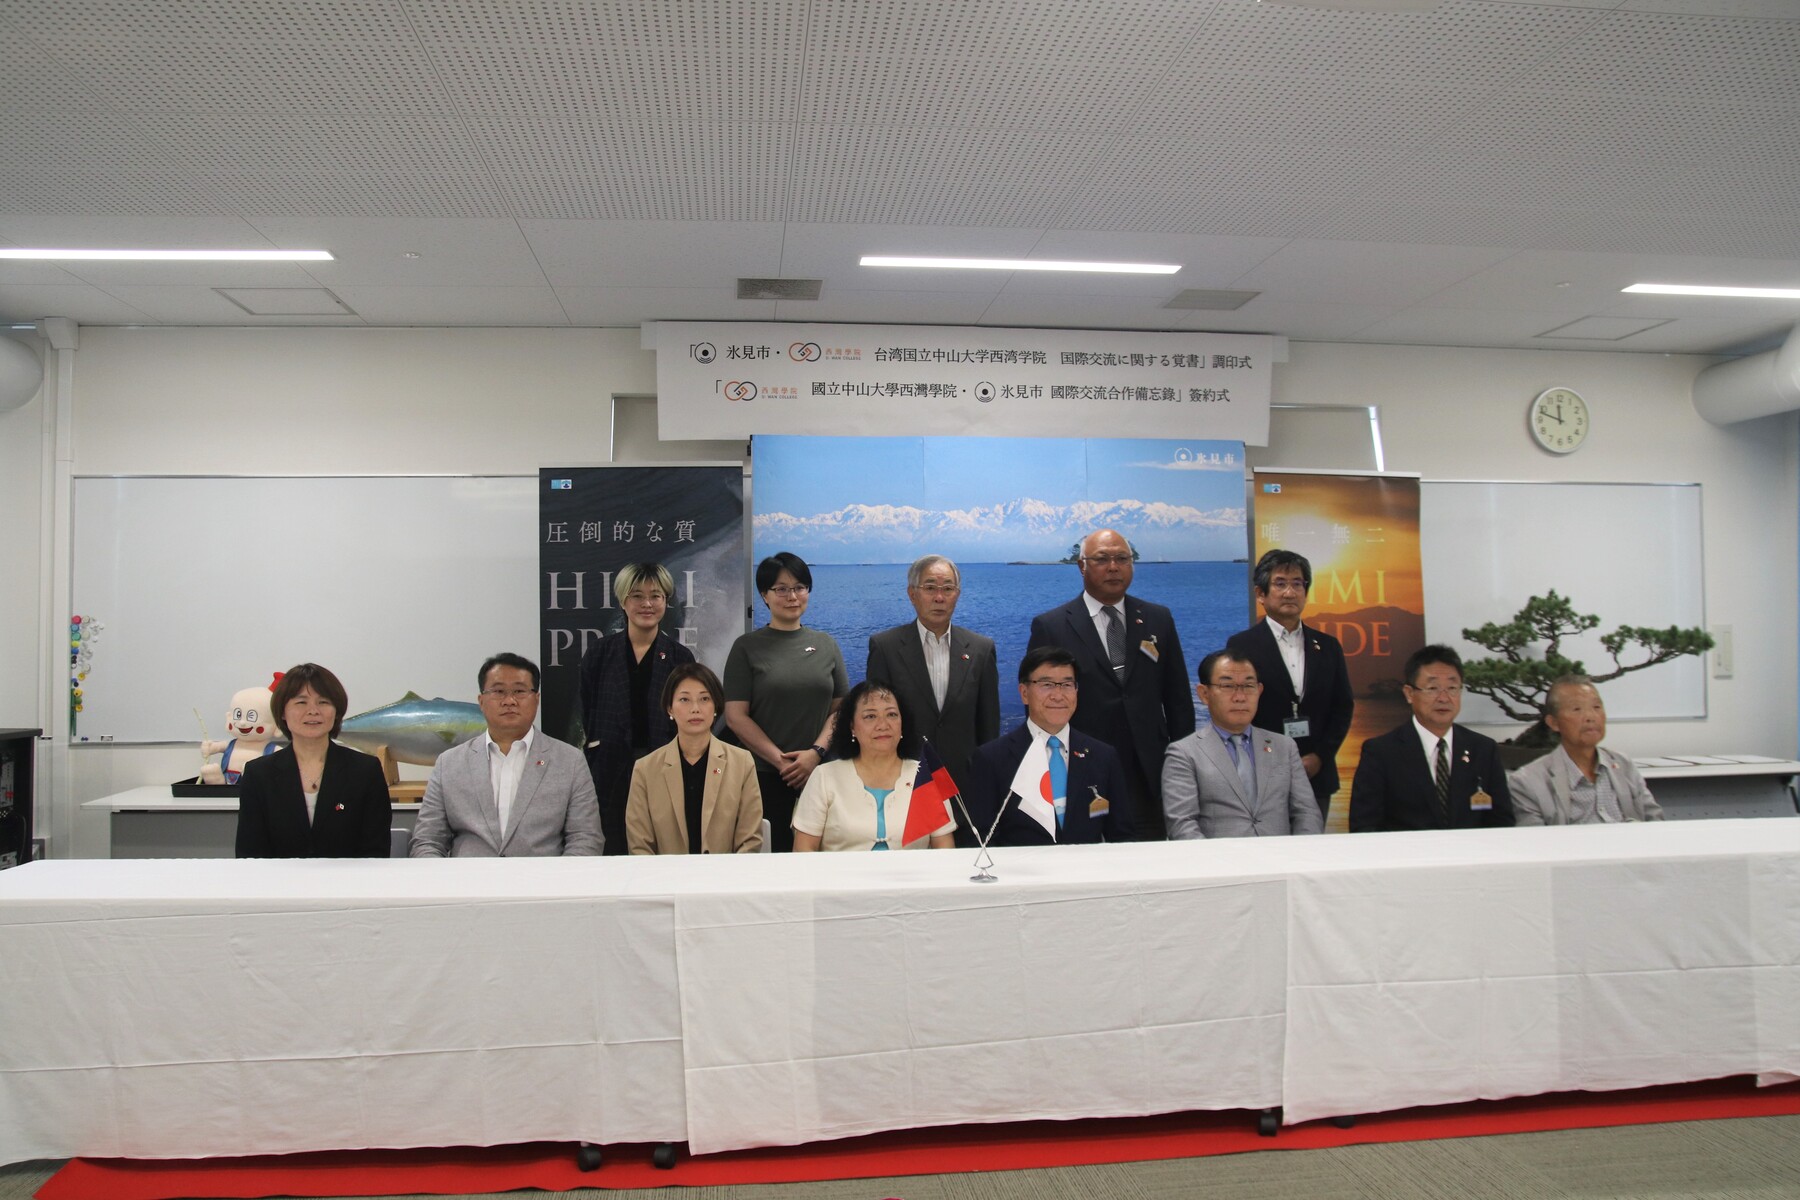 NSYSU cooperates with Himi City, Japan to launch cross-domain practical courses to jointly cultivate global localized talents.